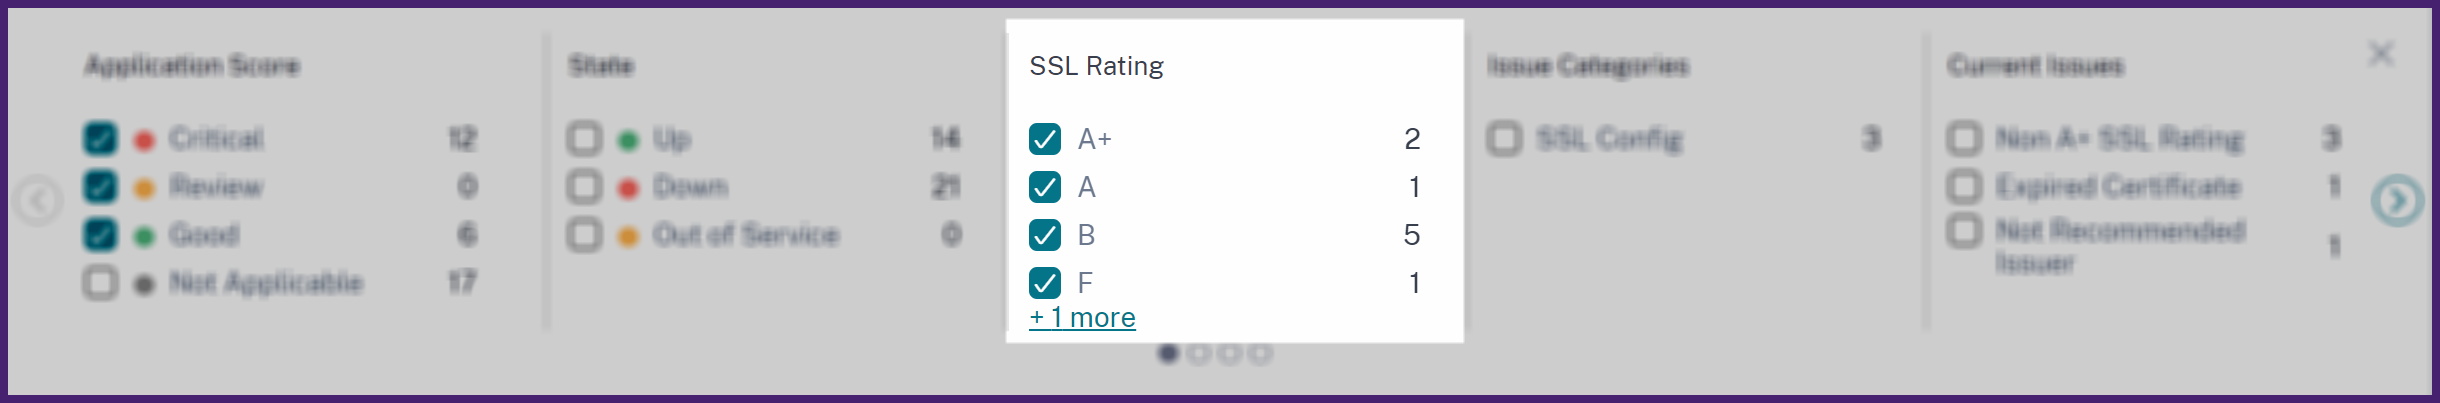 Filter applications by SSL ratings